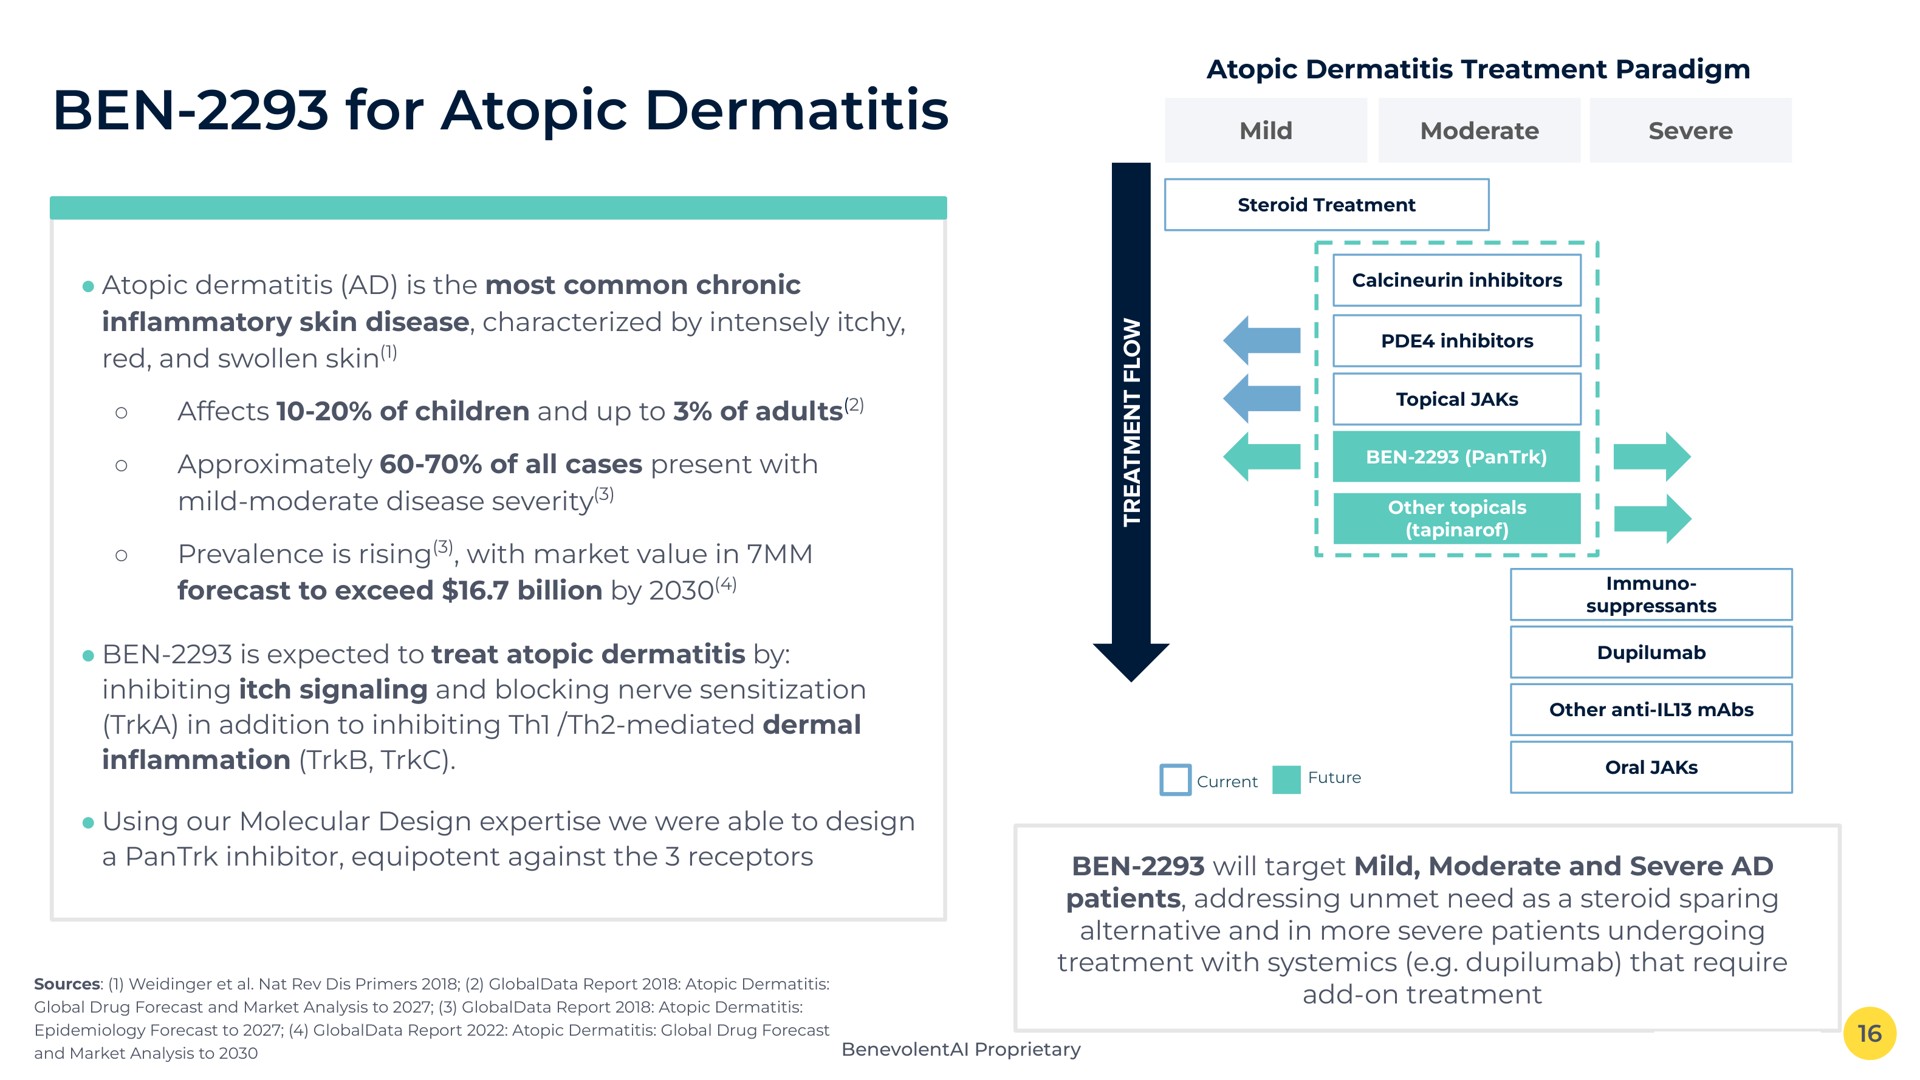 ben for atopic dermatitis atopic dermatitis is the most common chronic in skin disease characterized by intensely itchy red and swollen skin affects of children and up to of adults approximately of all cases present with mild moderate disease severity prevalence is rising with market value in forecast to exceed billion by ben is expected to treat atopic dermatitis by inhibiting itch signaling and blocking nerve sensitization in addition to inhibiting mediated dermal in using our molecular design we were able to design a inhibitor equipotent against the receptors atopic dermatitis treatment paradigm mild moderate severe ben will target mild moderate and severe patients addressing unmet need as a steroid sparing alternative and in more severe patients undergoing treatment with that require add on treatment i | BenevolentAI